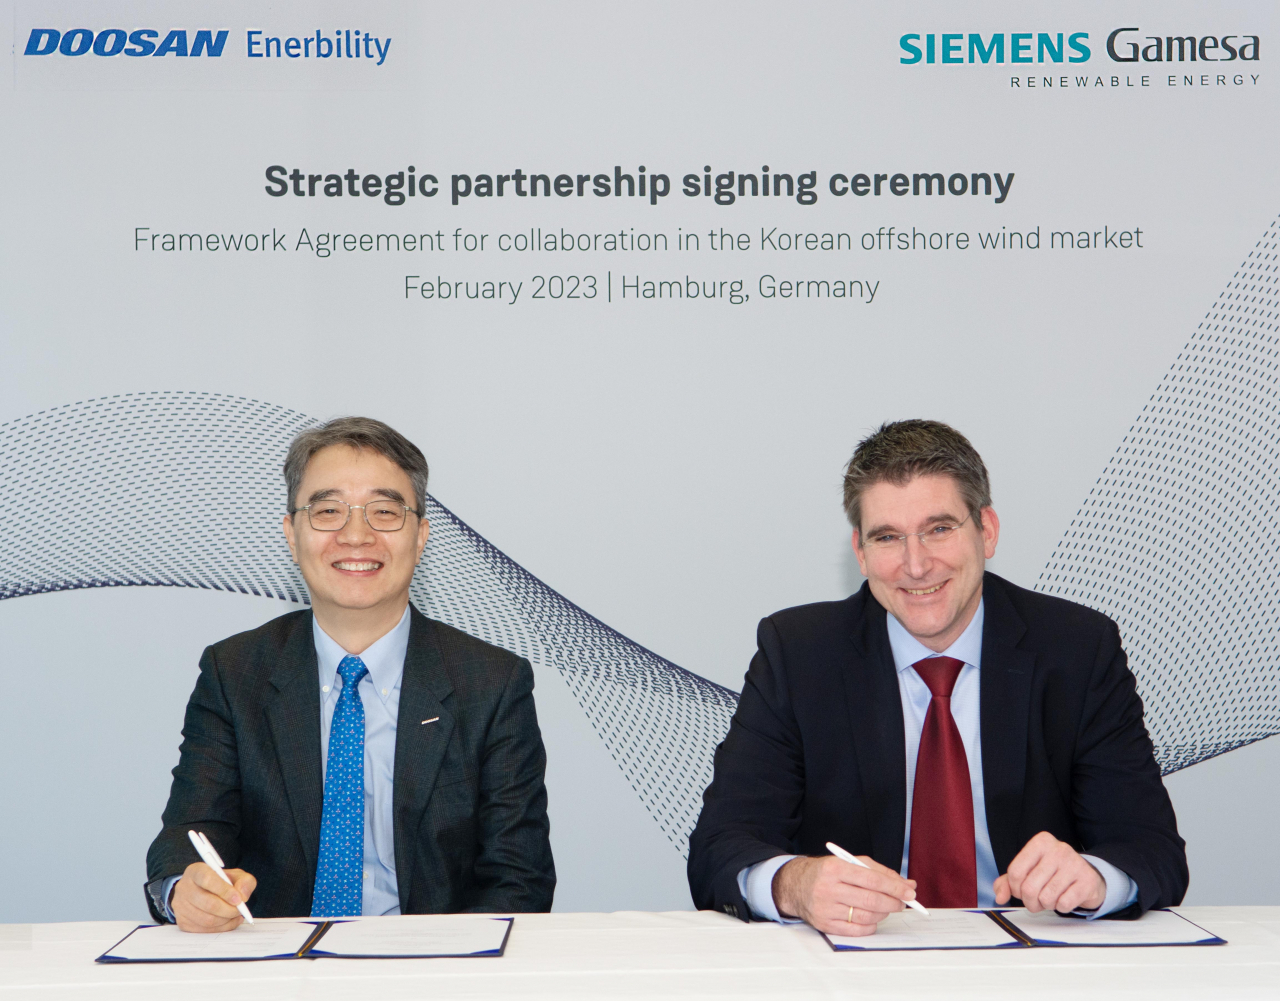 CEO of Doosan Enerbility’s Power Services Business Group Park Hongook (left) and CEO of Siemens Gamesa’s offshore business Marc Becker sign a framework agreement for strategic cooperation in the Korean offshore wind power market. (Doosan Enerbility)